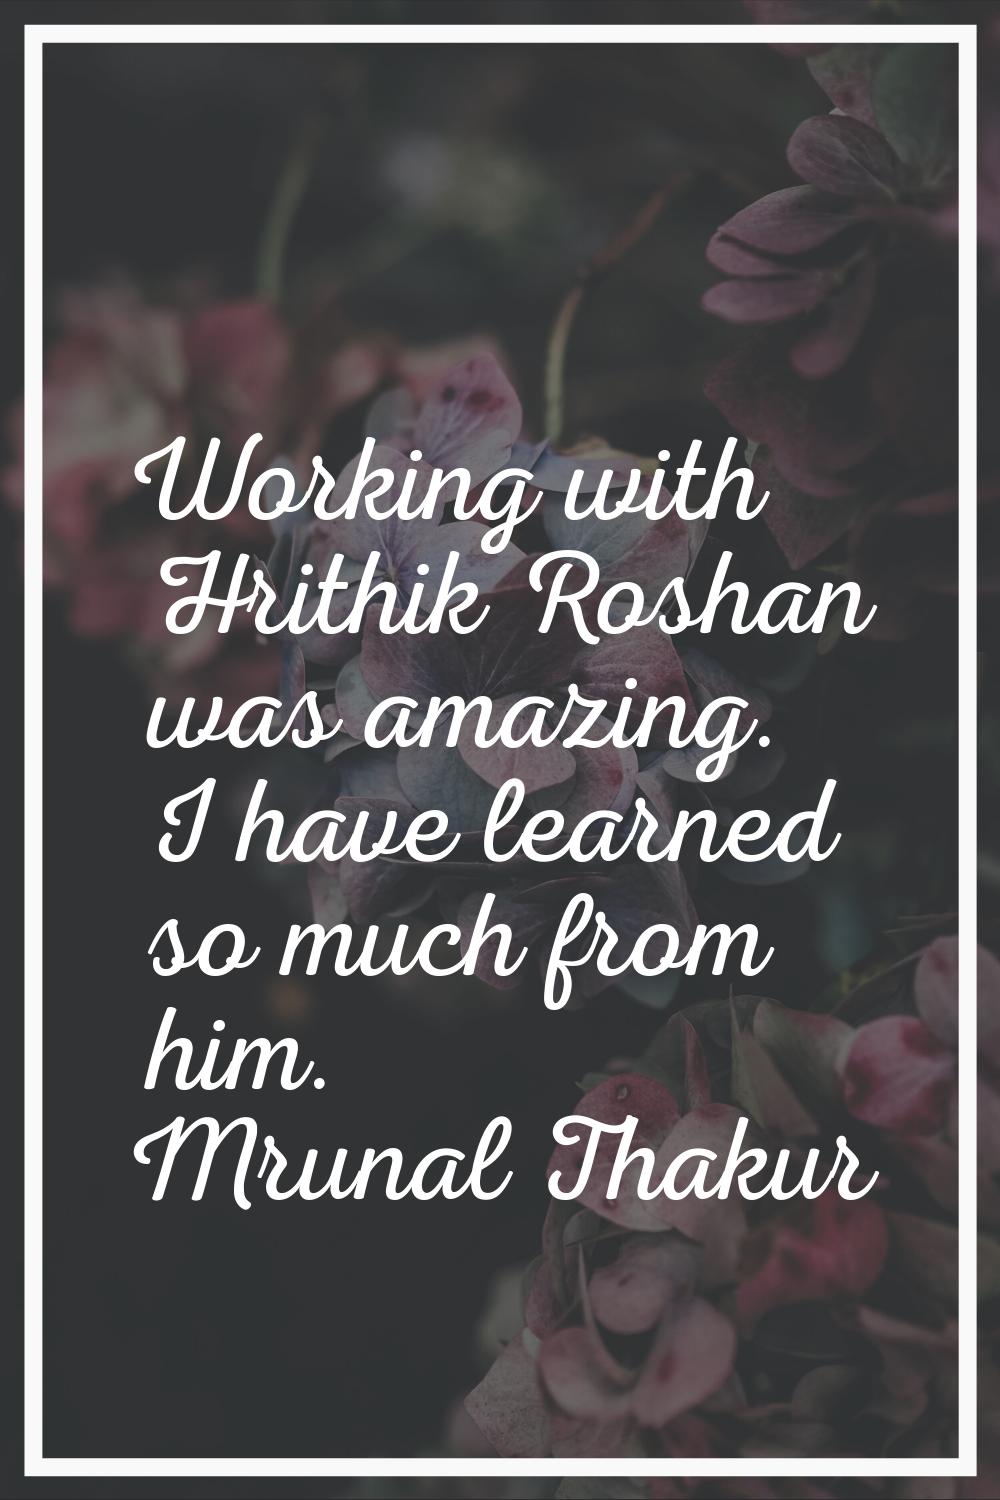 Working with Hrithik Roshan was amazing. I have learned so much from him.